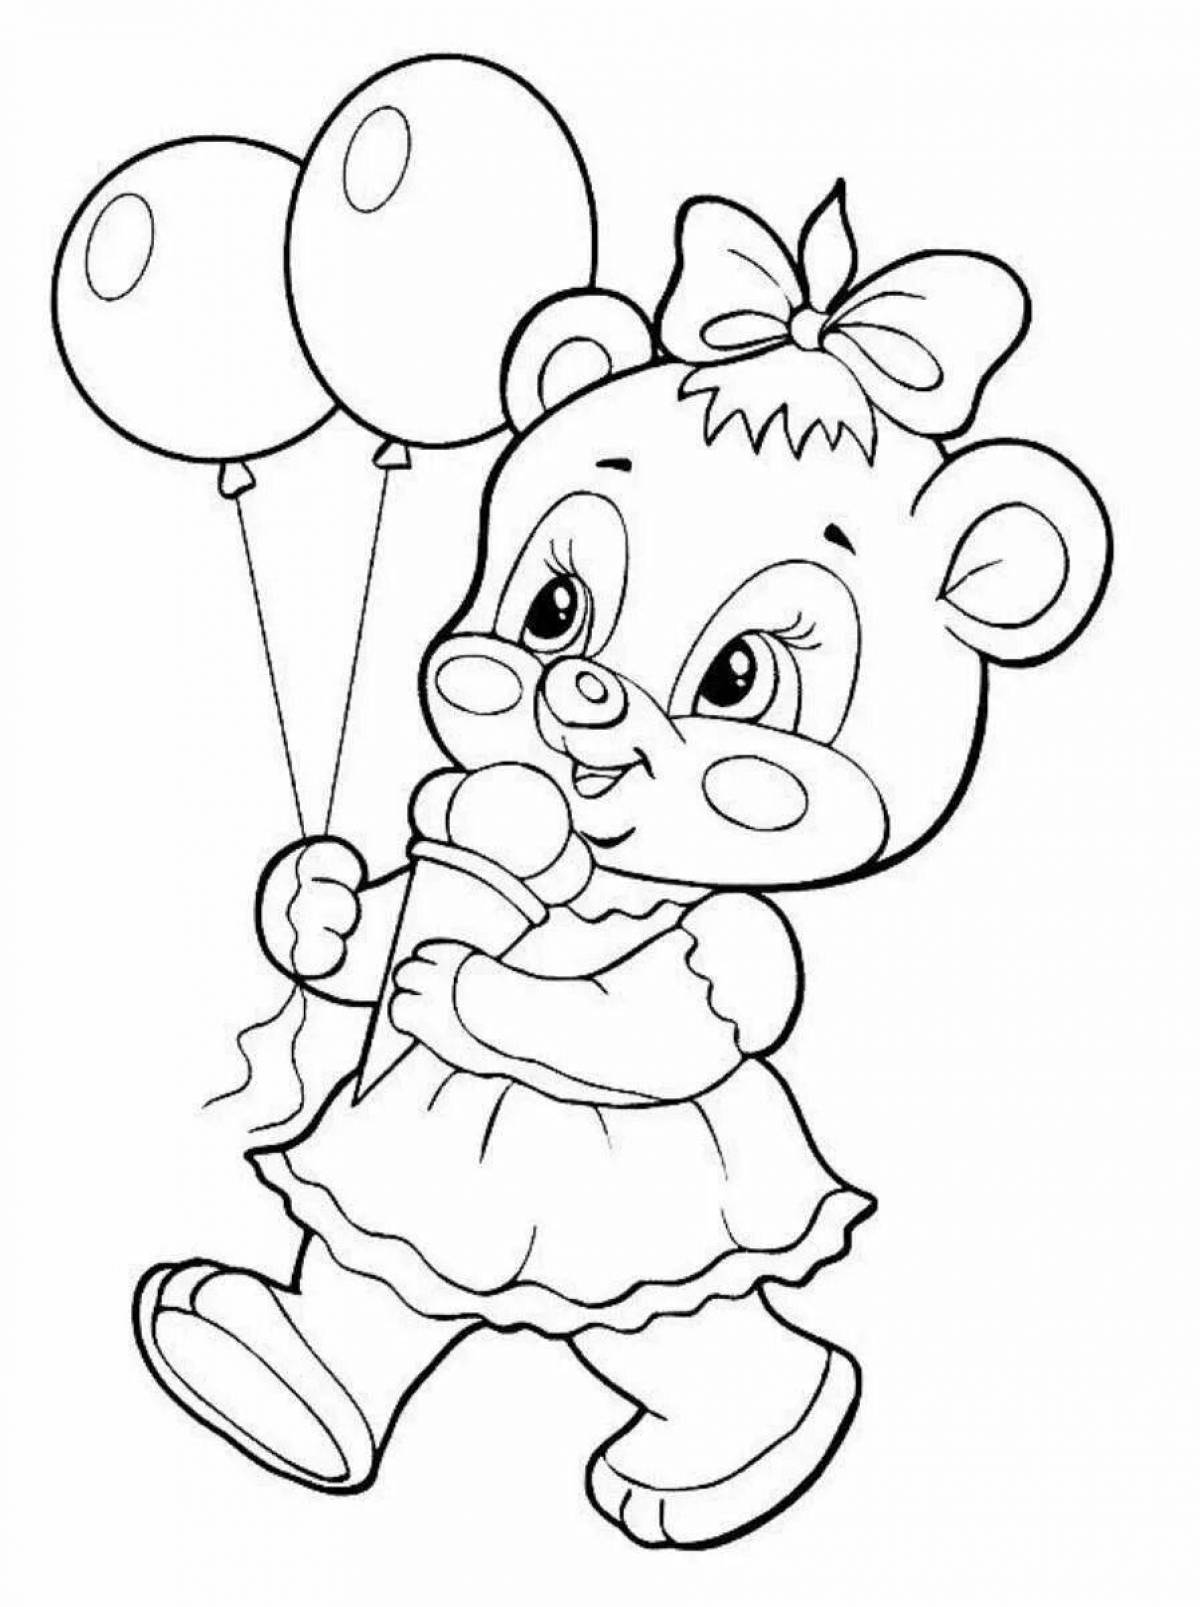 Glowing teddy bear coloring page for girls